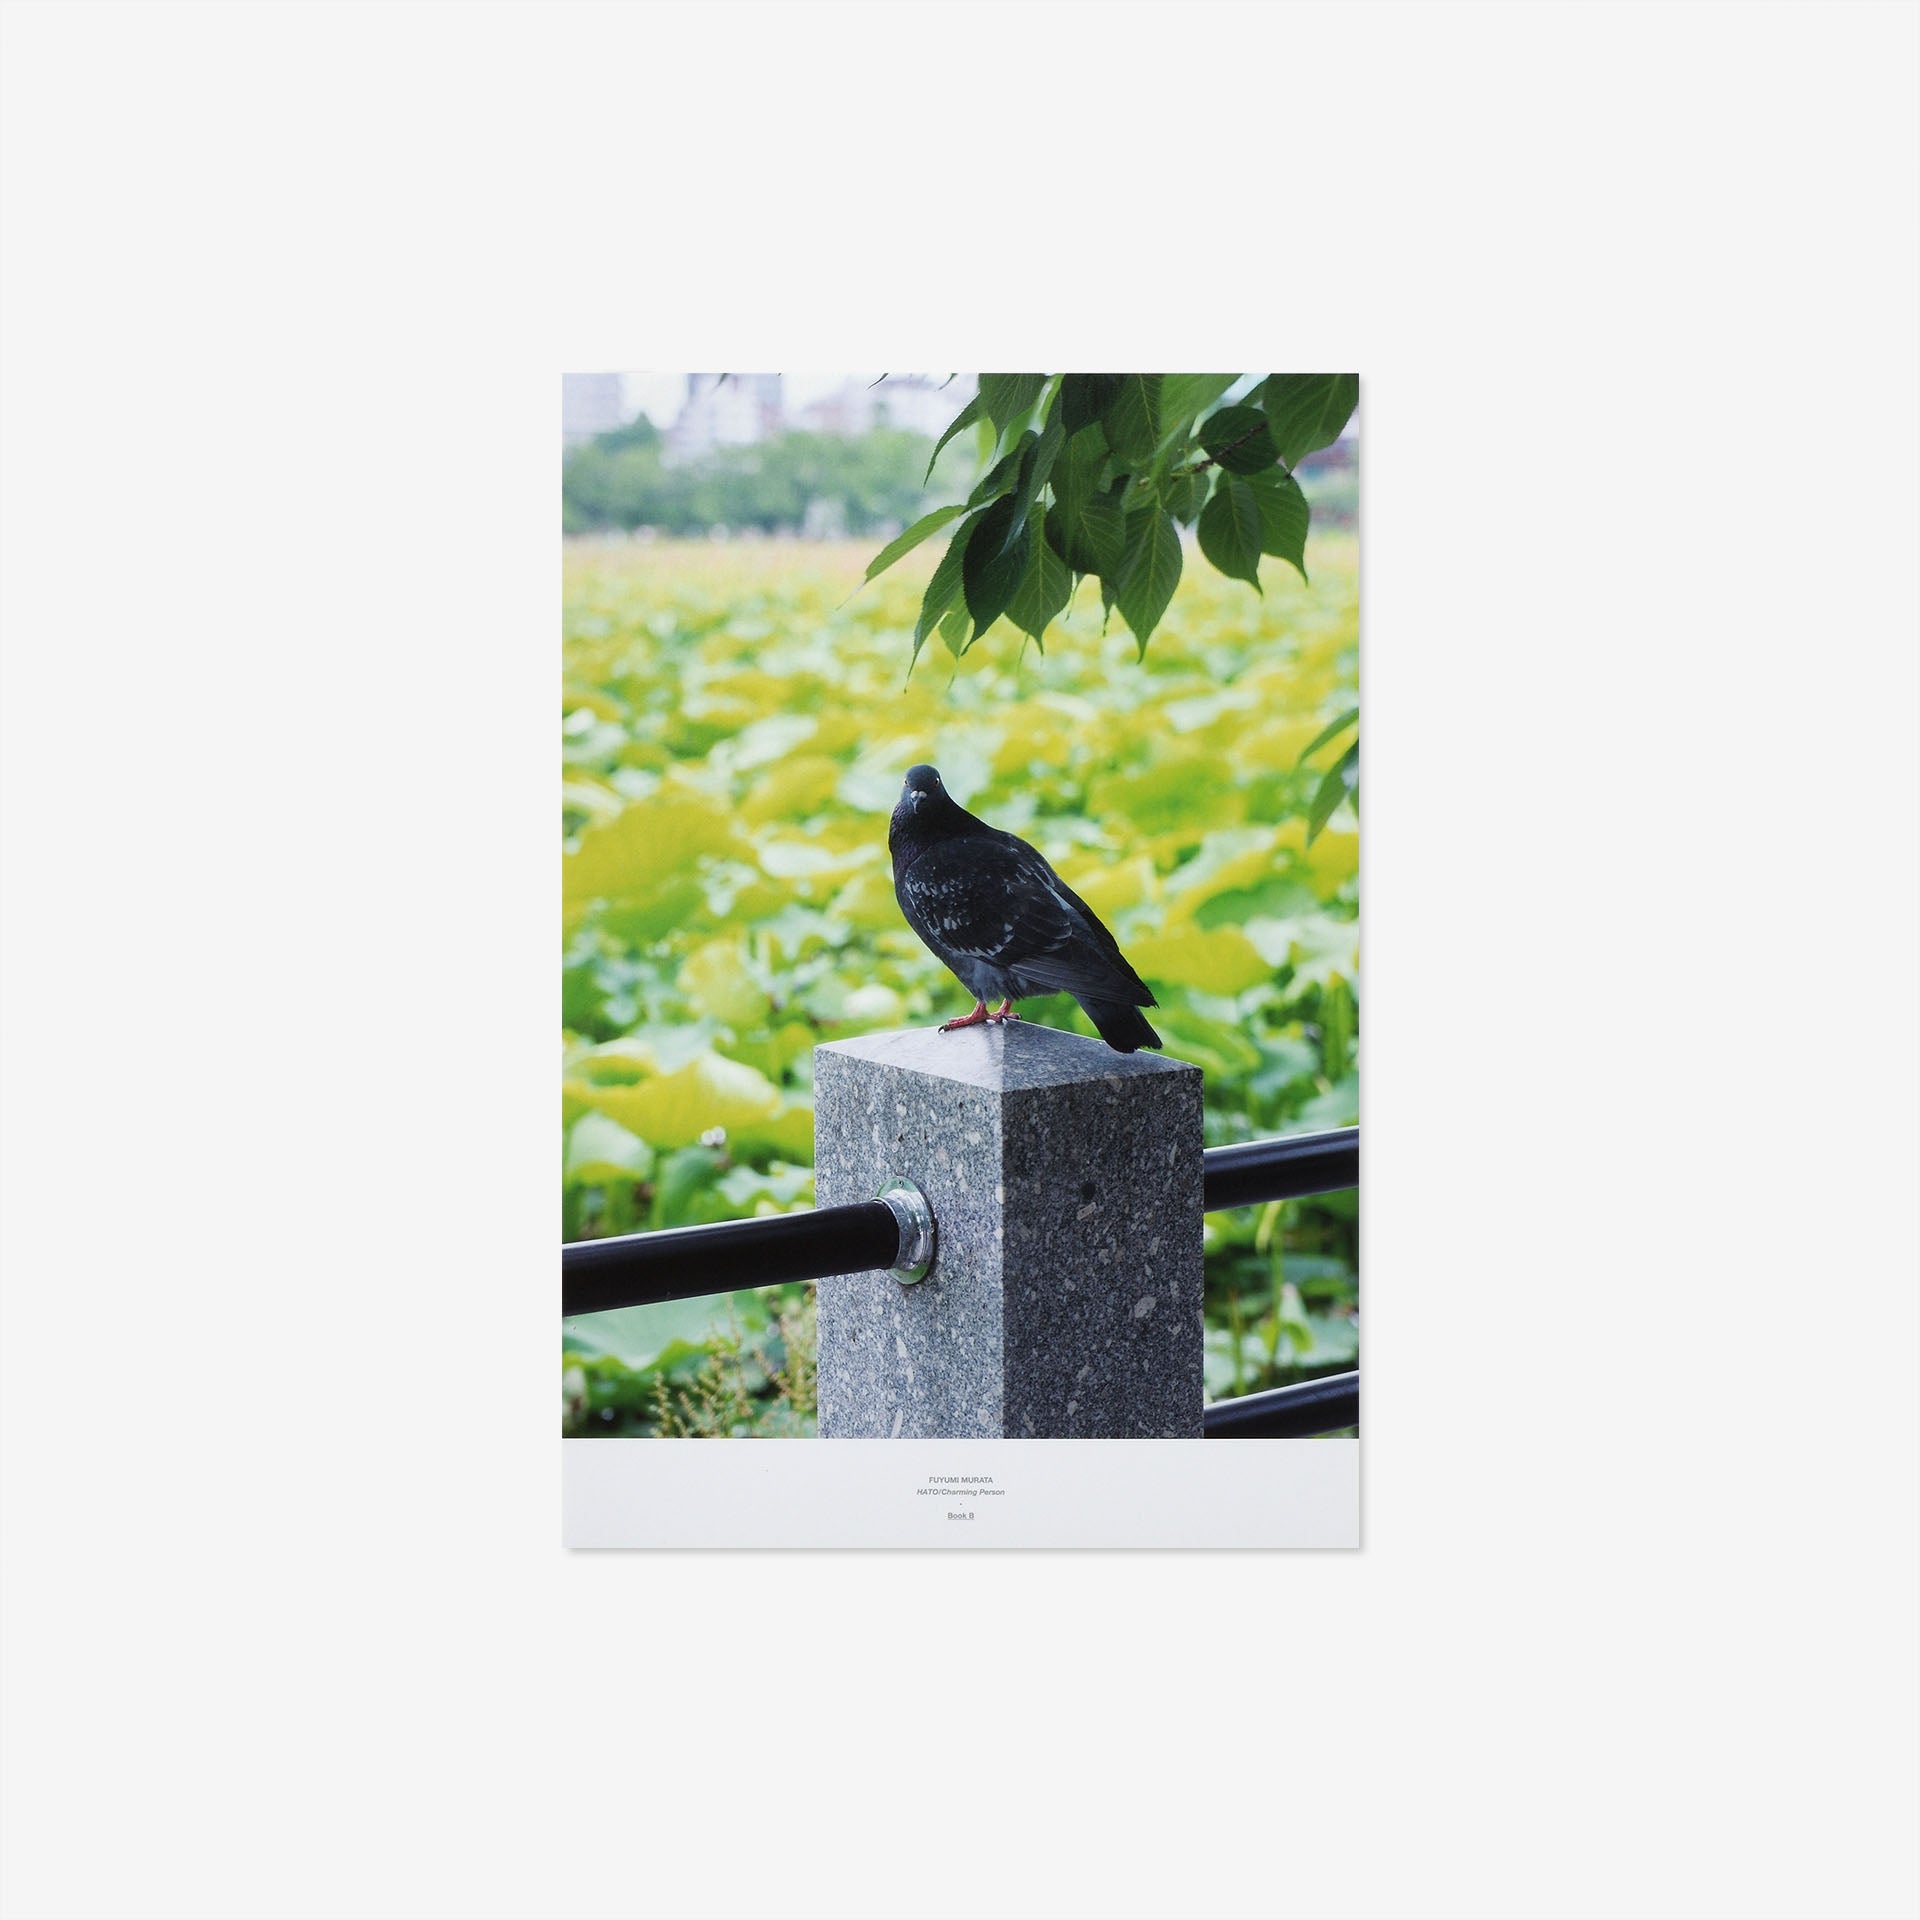 Waiting for you | HATO / Charming Person